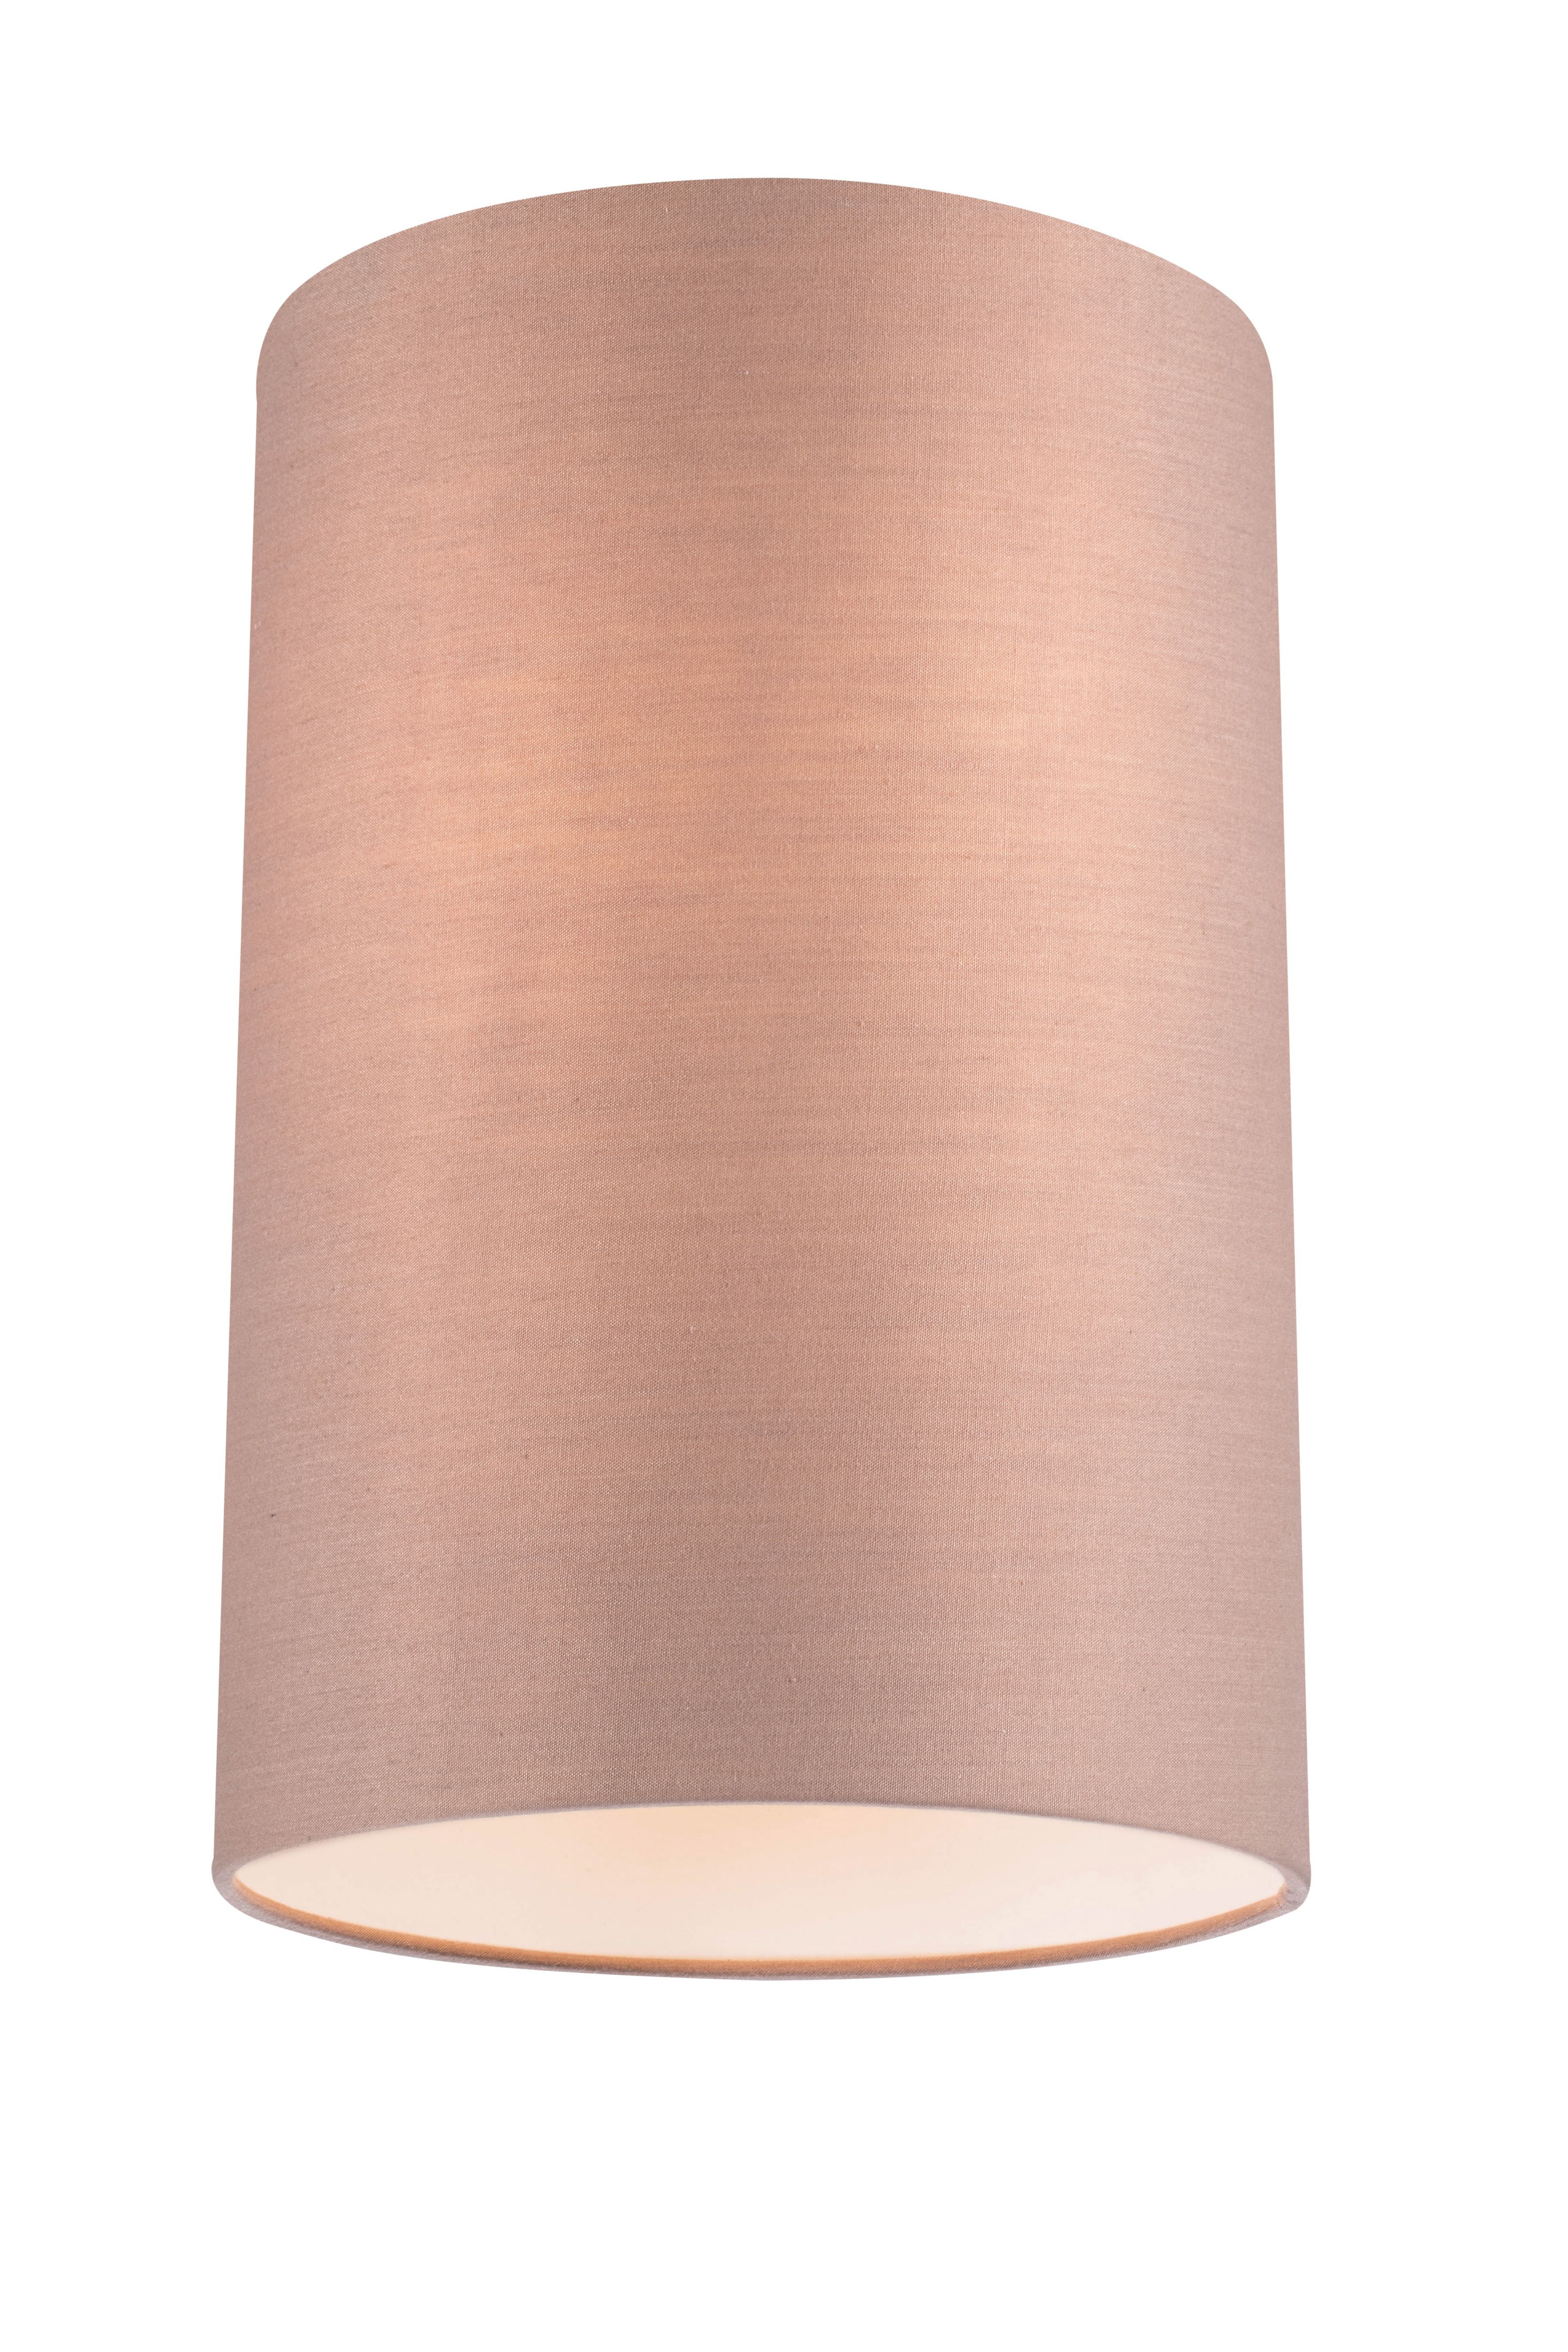 GoodHome Pibrock Taupe Fabric dyed Light shade (D)20cm